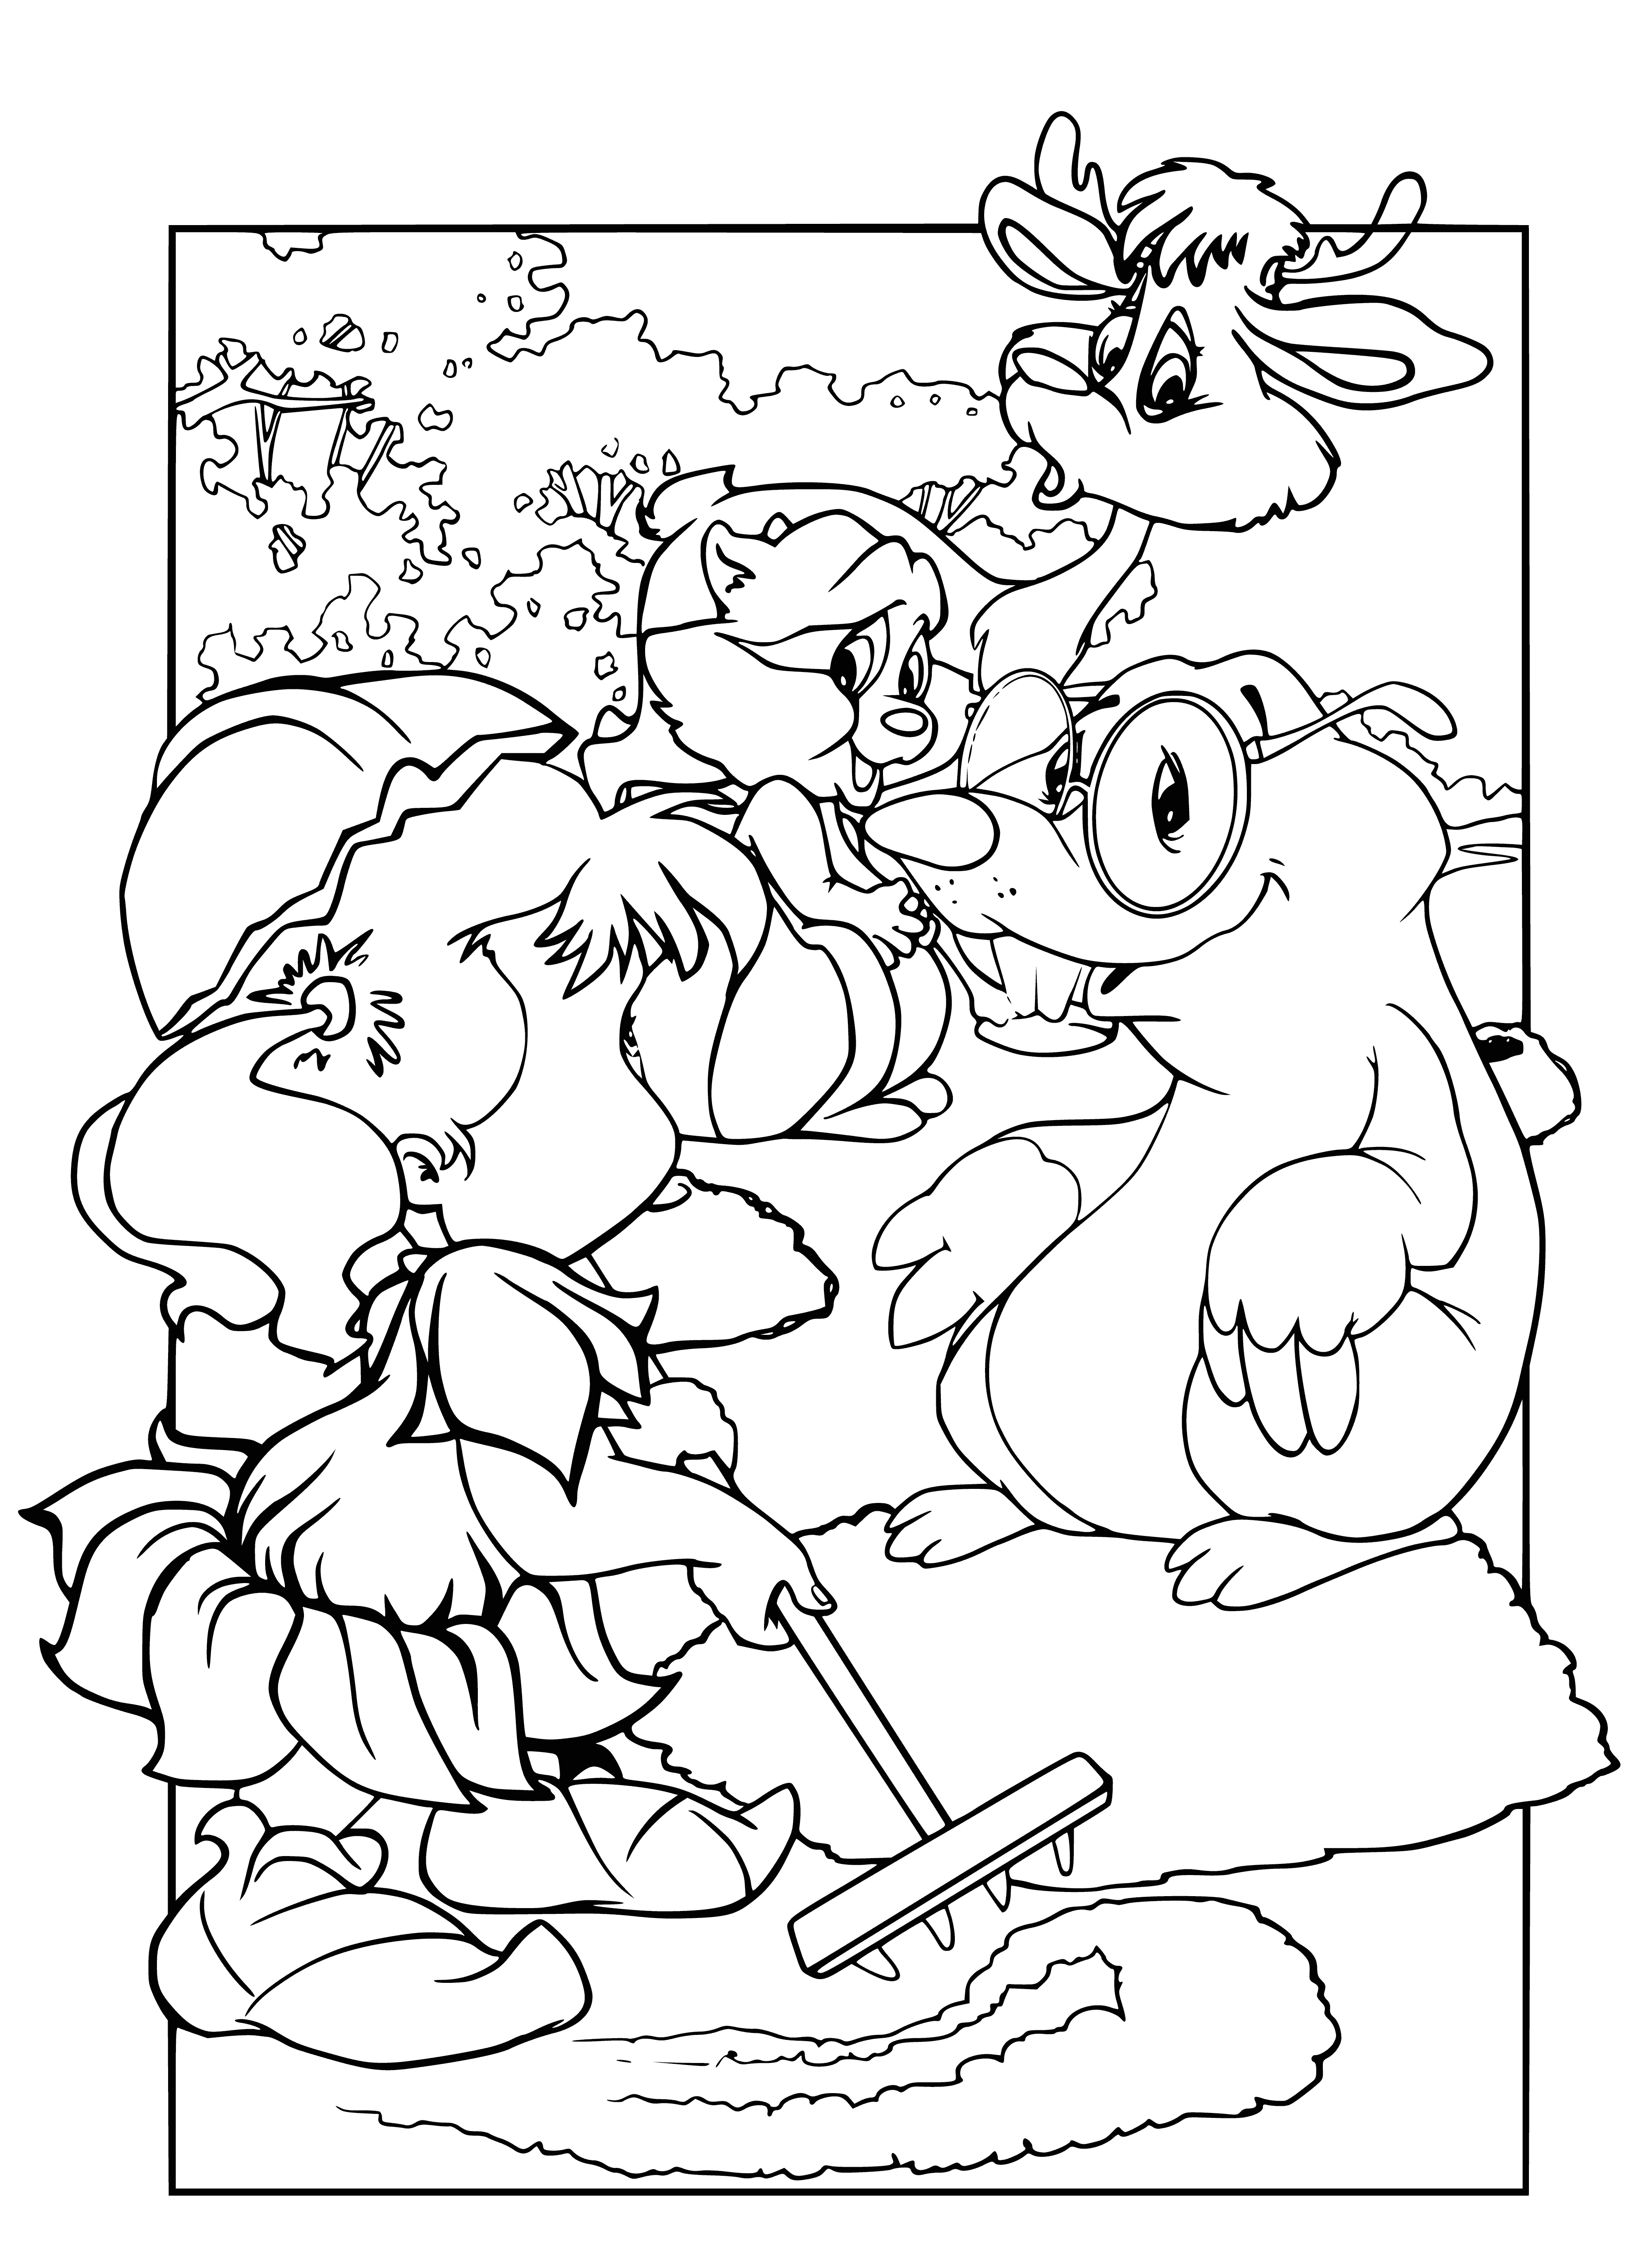 coloring page: Little Oreshenka with a red flower in her hand & blue-clad mole stand together - they both have red scarves & hold red flowers.